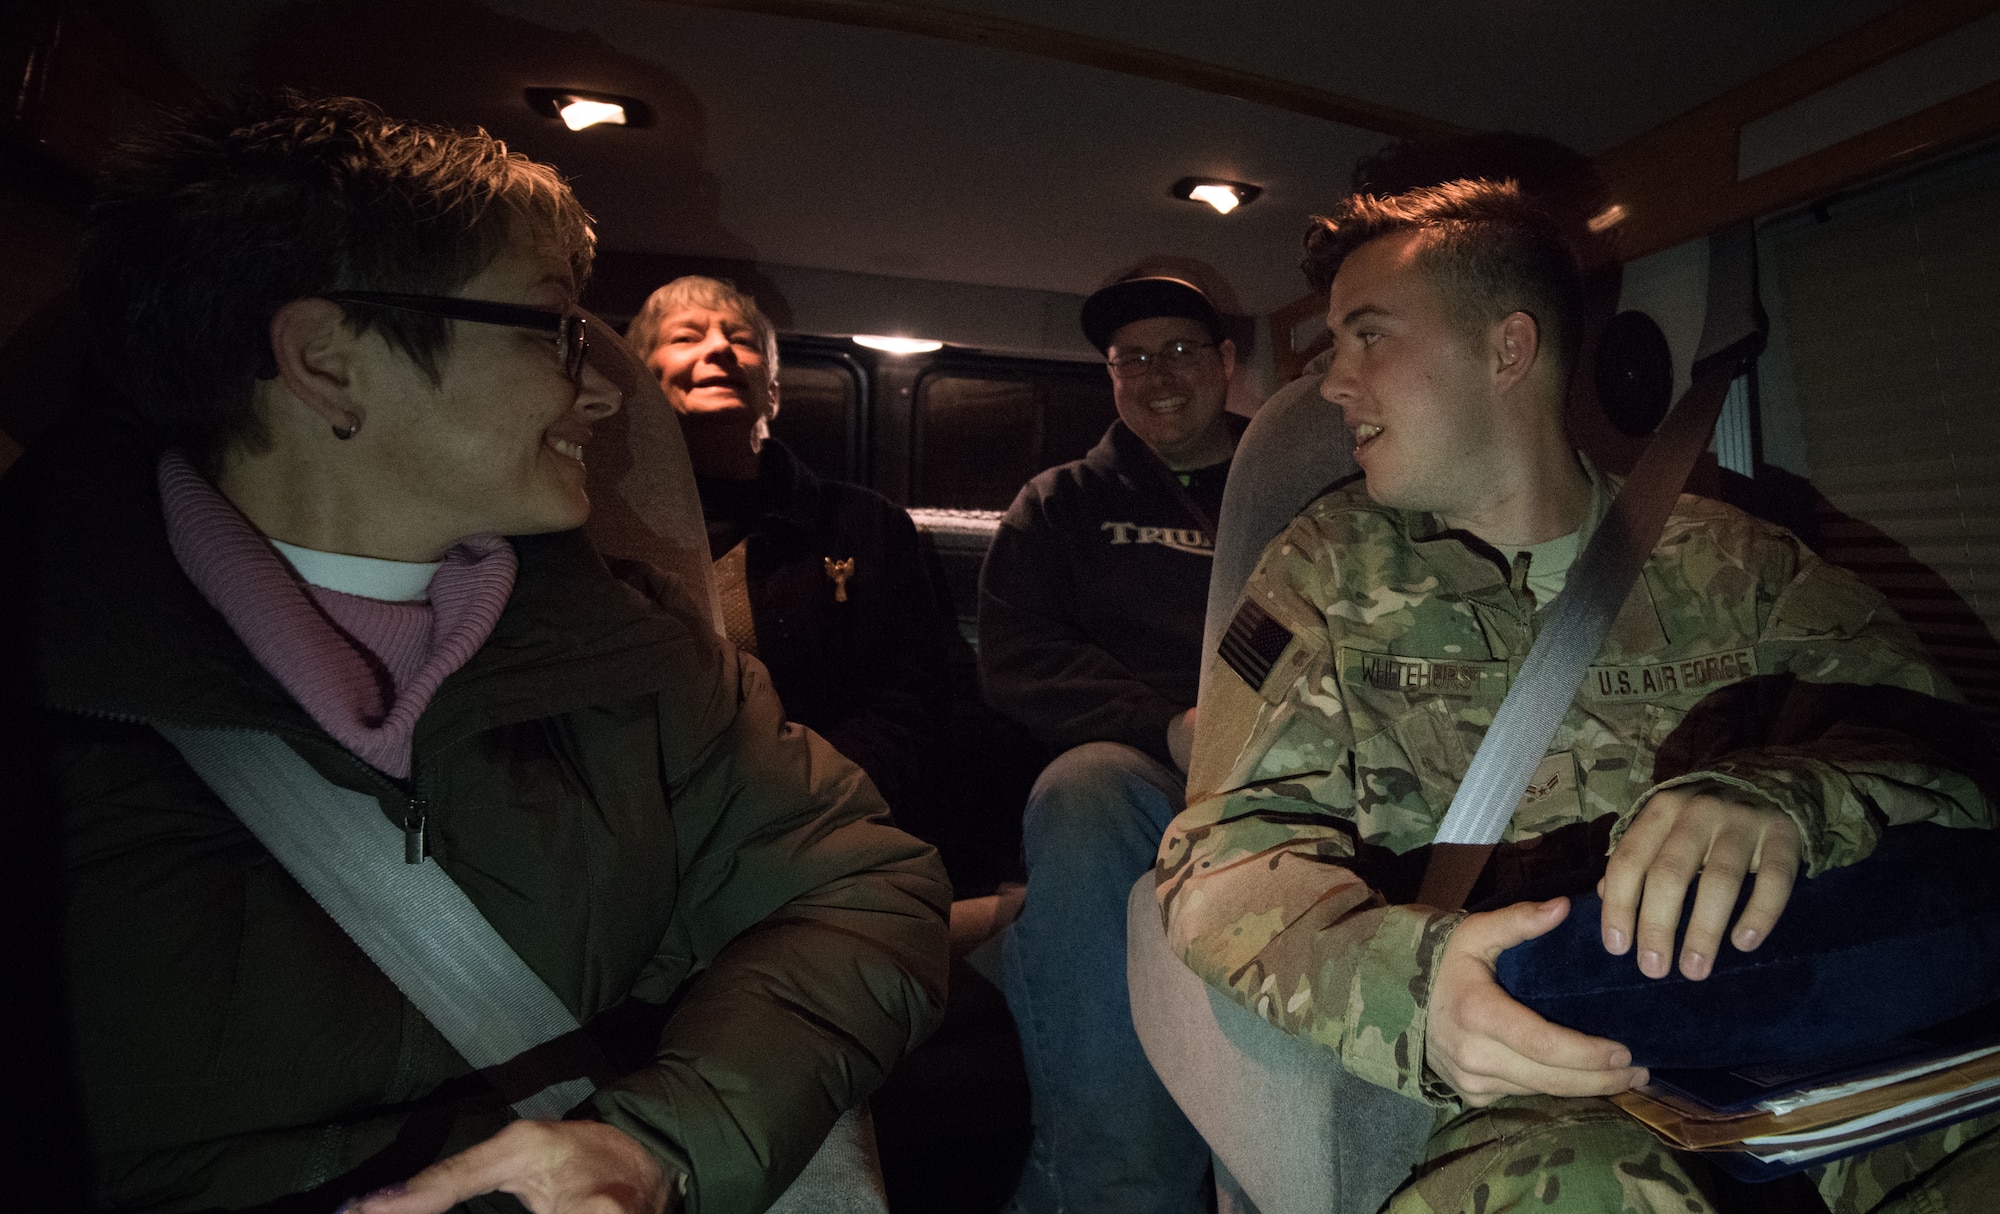 U.S. Air Force Airman 1st Class Nicholas Whitehurst, 633rd Communications Squadron client systems technician, jokes around with his family on their drive to the airport in Hampton, Virginia, March 27, 2018.